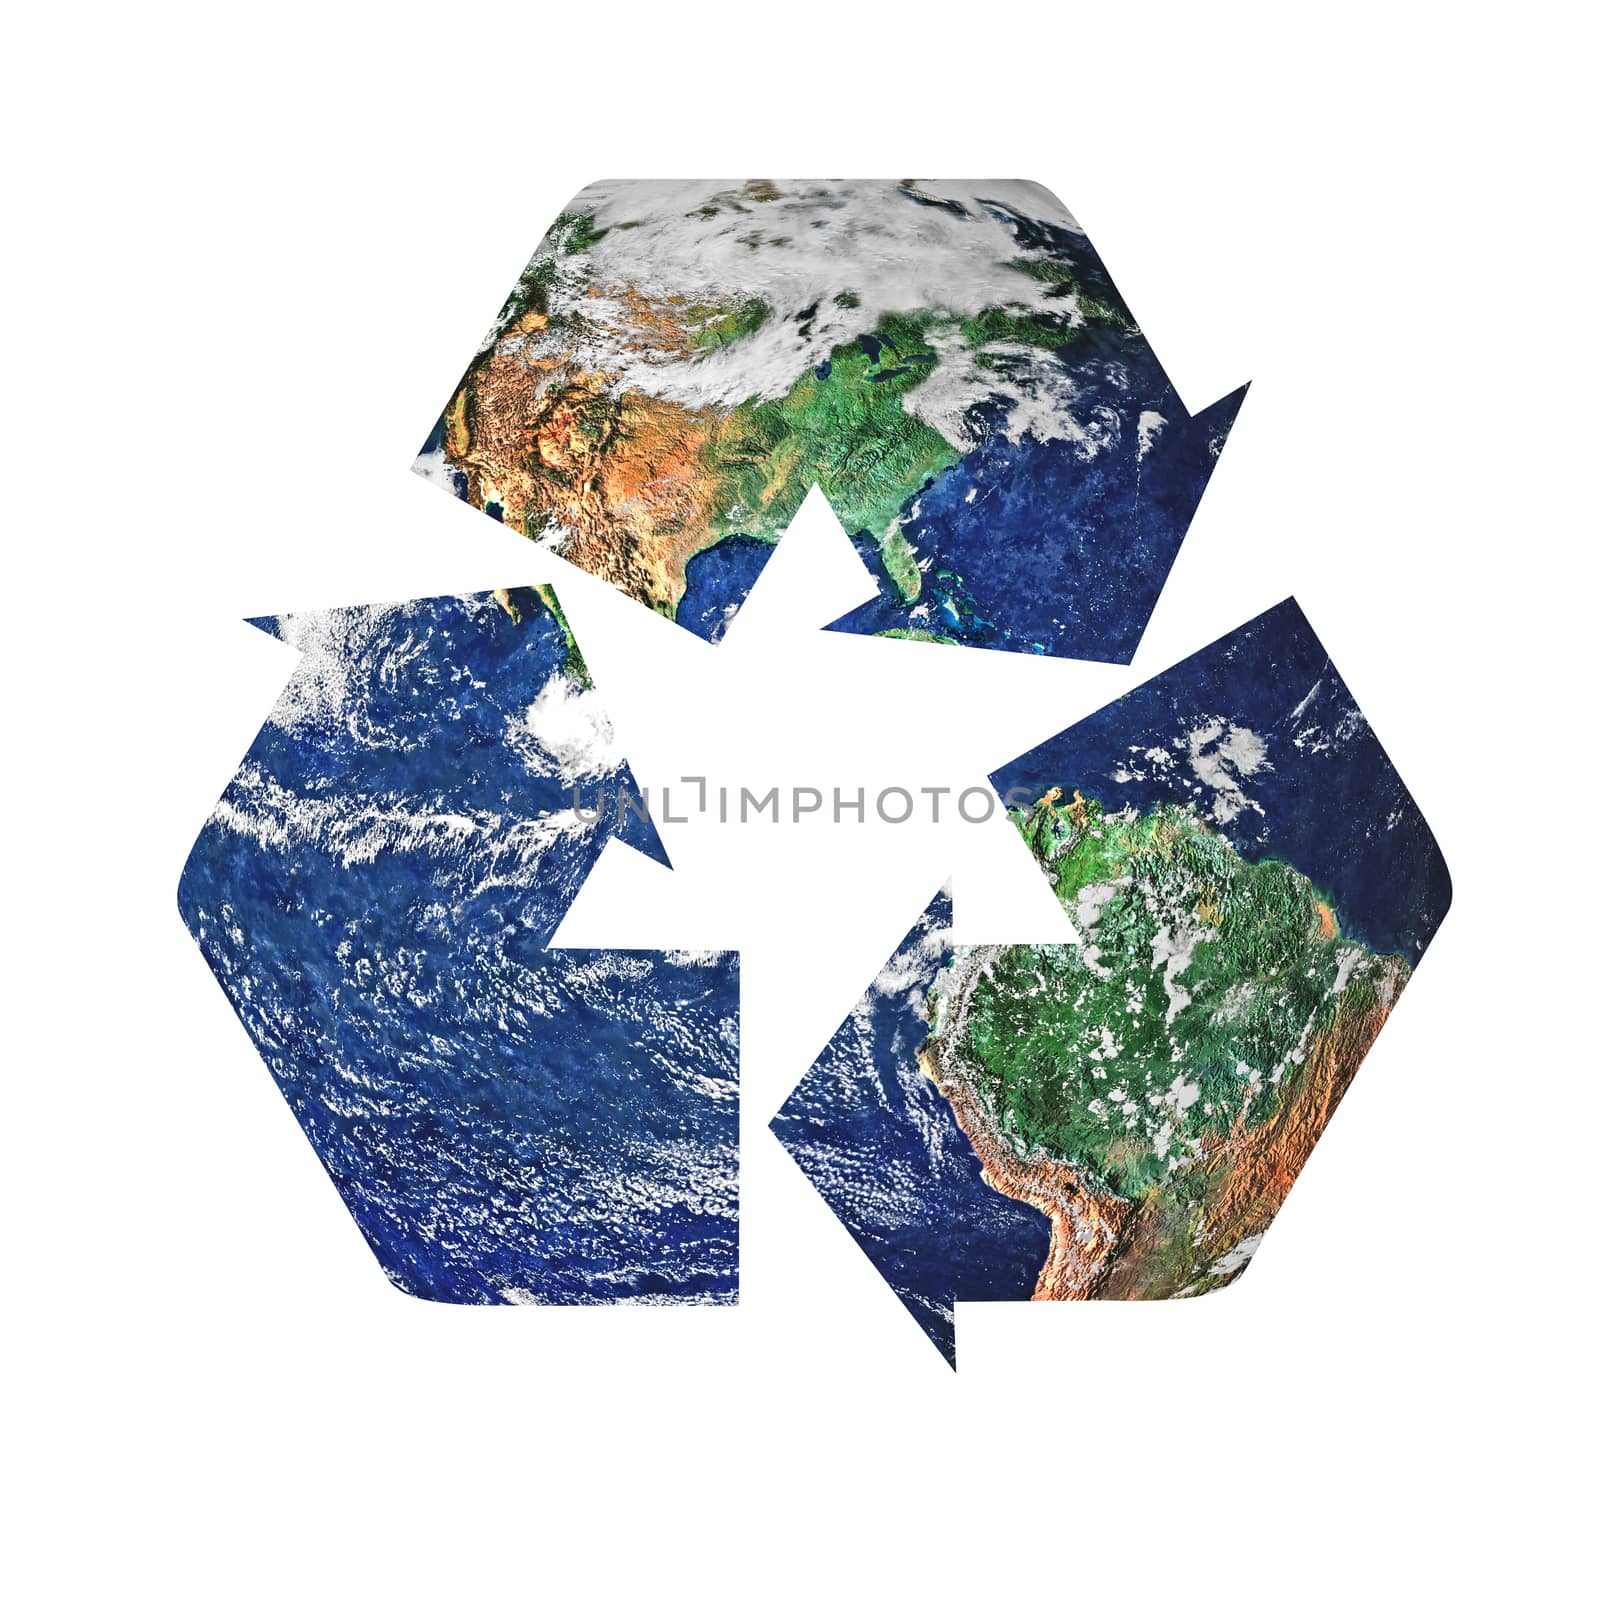 Recycle symbol superimposed upon the planet earth. Isolated on a white background